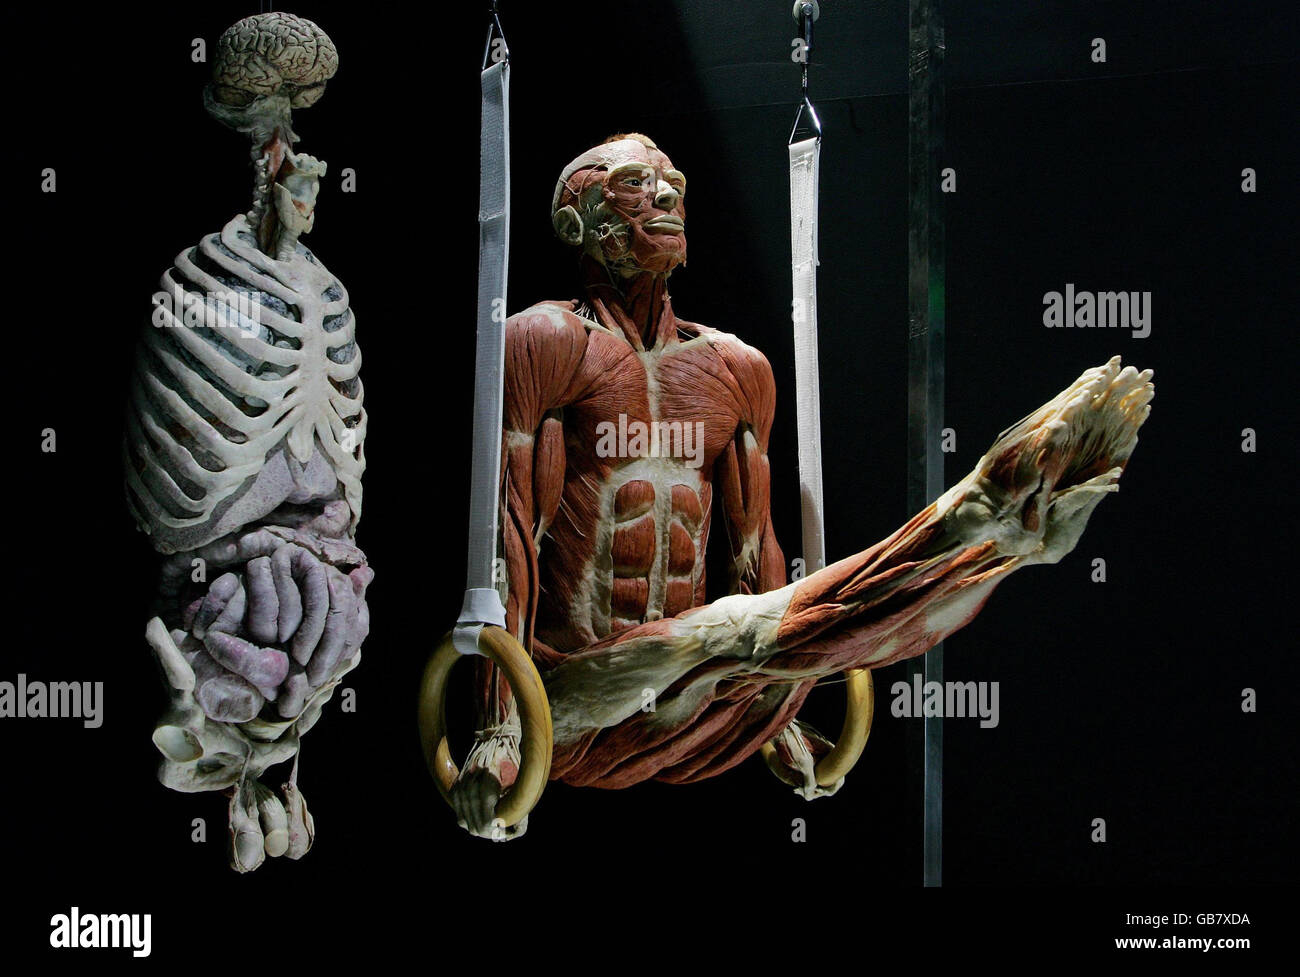 MBARGOED TO 1000 THURSDAY OCTOBER 23. 'The Ring Gymnast' which forms part of anatomist Dr Gunther von Hagens' latest exhibition, Body Worlds & The Mirror of Time, at The O2 , London. Stock Photo